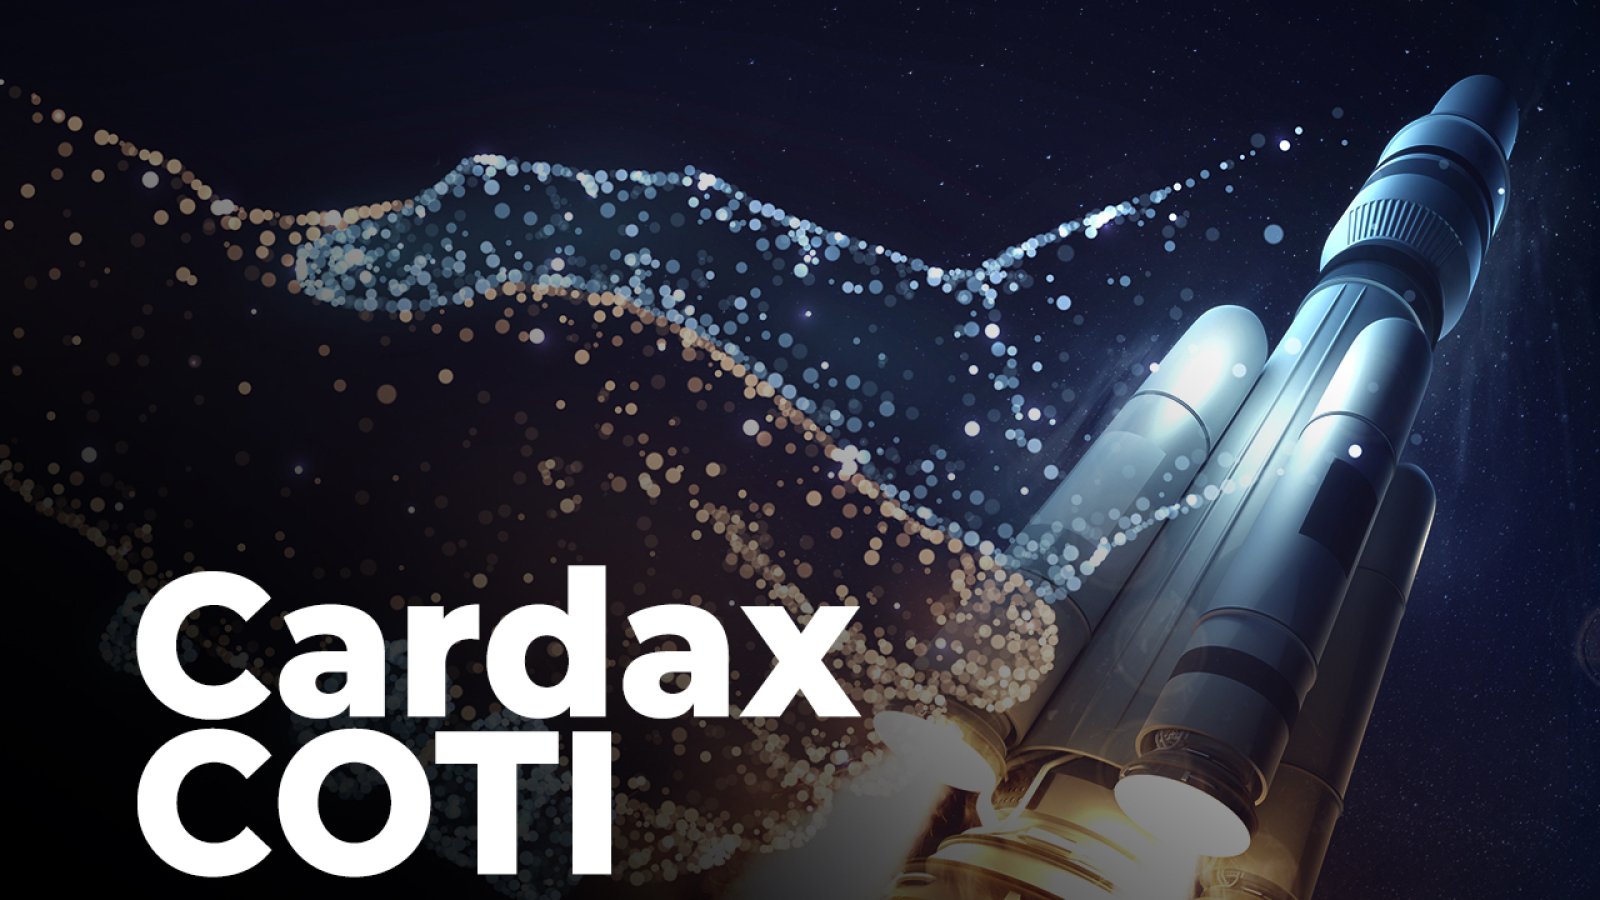 Сardax Shares Mainnet Launch Date for DEX, Unveils COTI Partnership